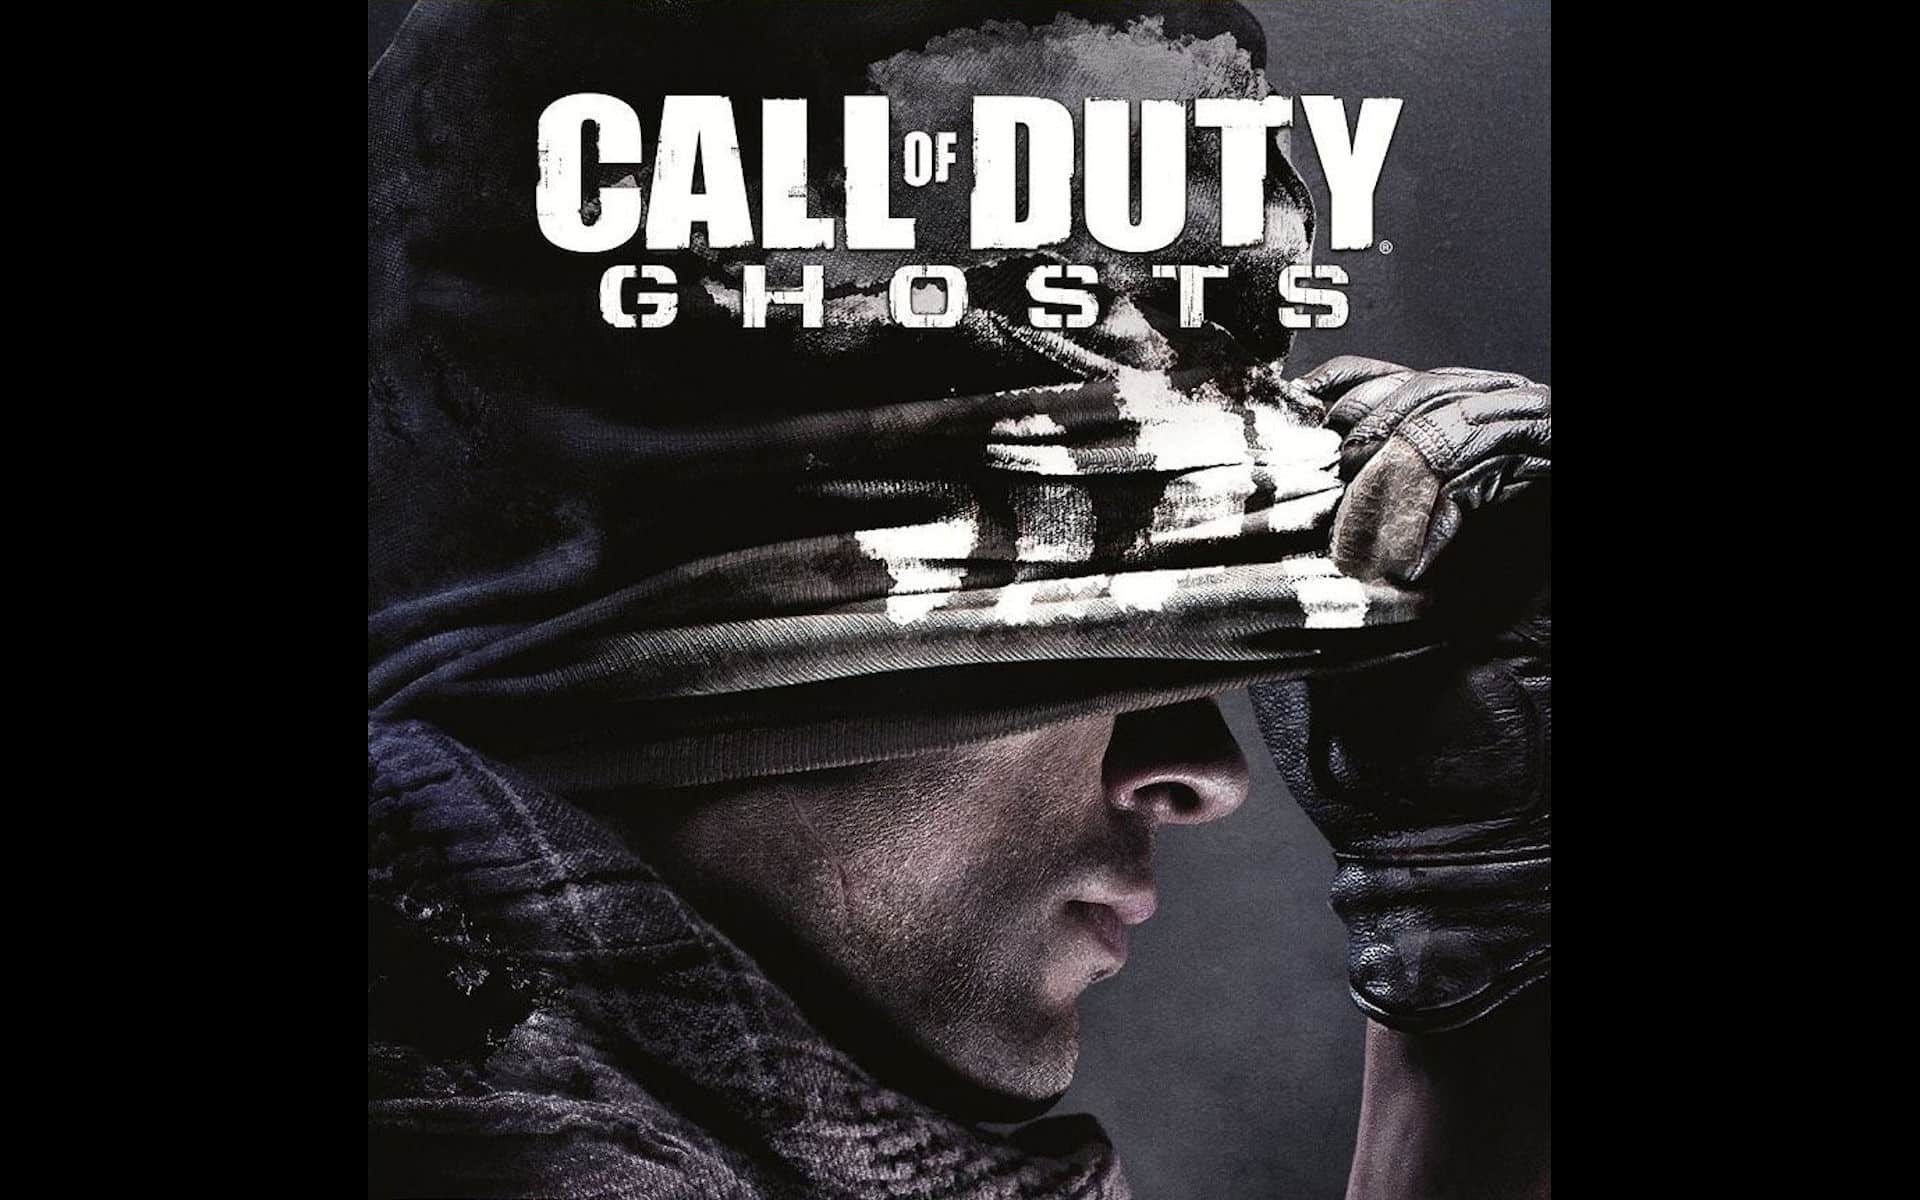 Call of Duty Ghosts Wallpaper (HD) - Video Games Blogger